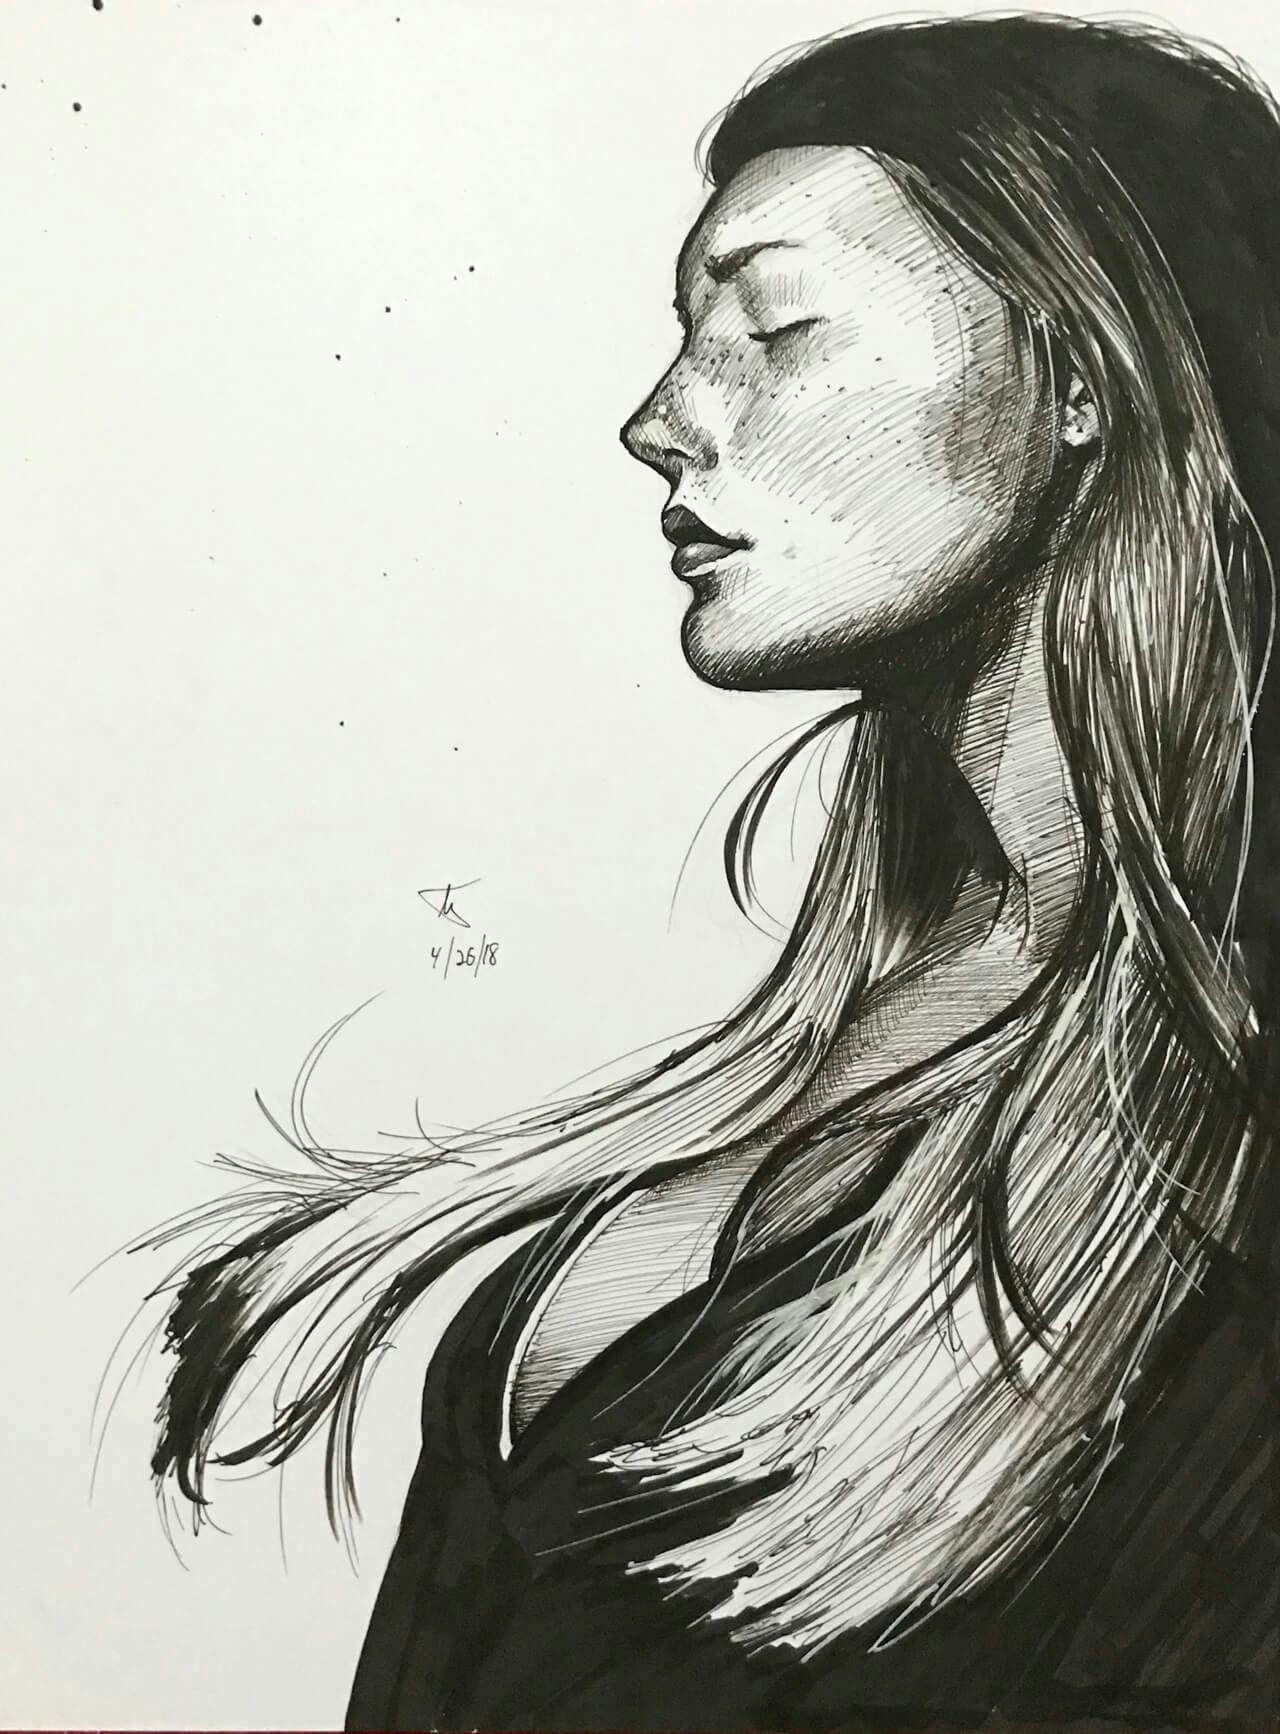 Pen & ink drawing, woman with long hair, eyes closed in a black shirt turned to the side